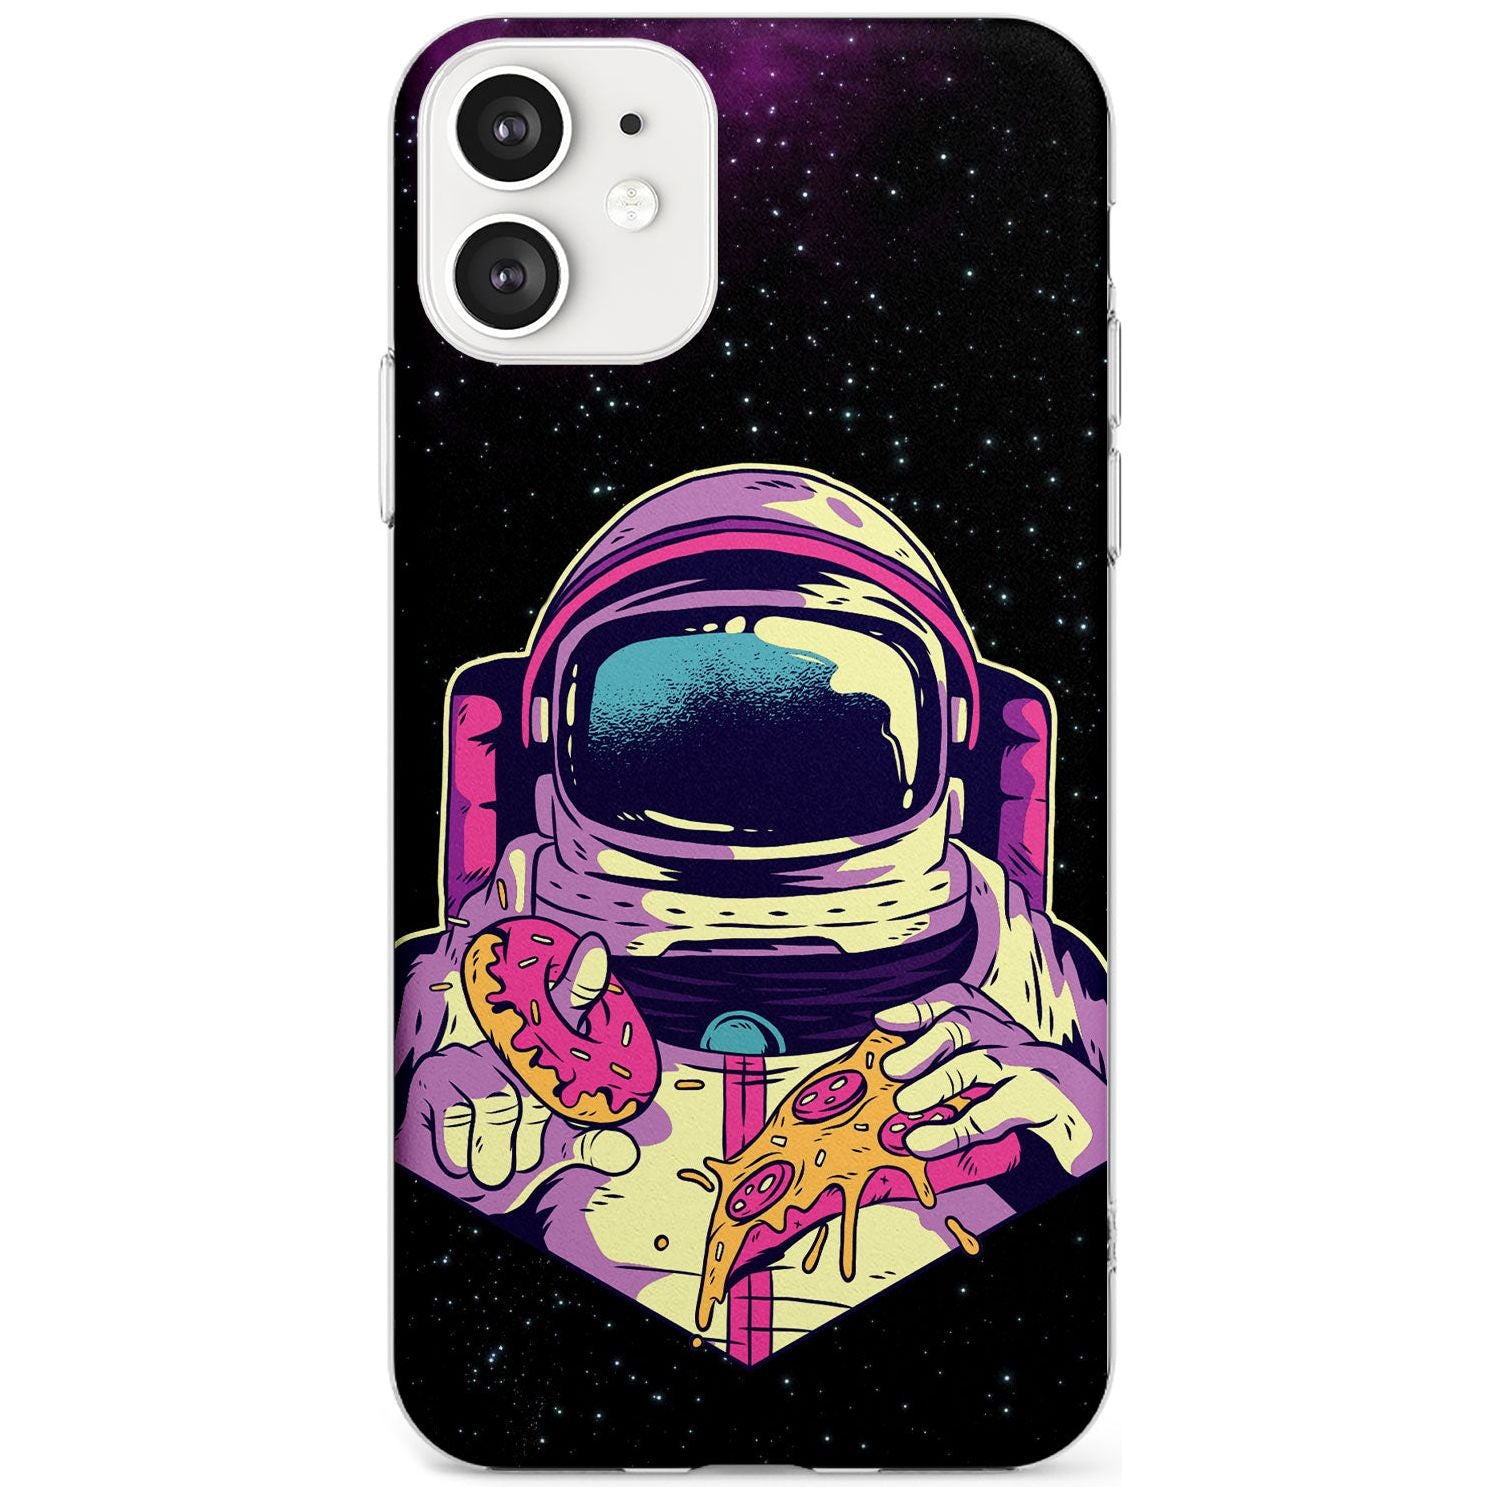 Astro Cheat Meal Slim TPU Phone Case for iPhone 11